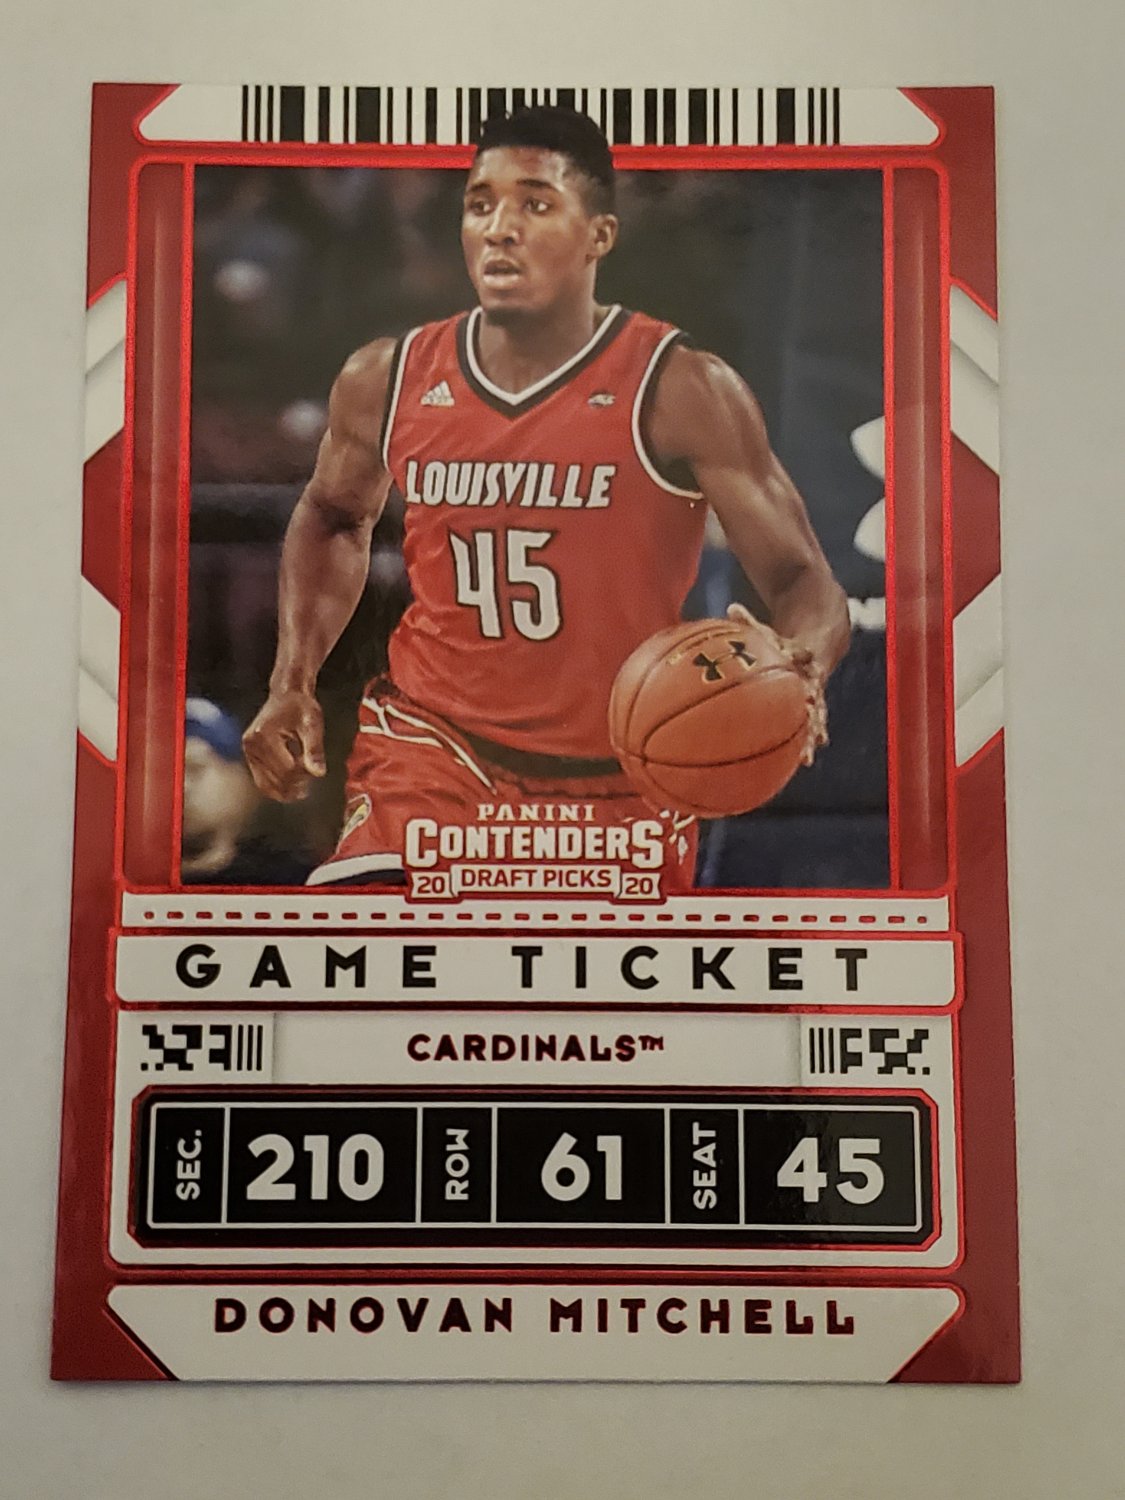 Donovan Mitchell 2020-21 Contenders Draft Picks Game Ticket Red Card